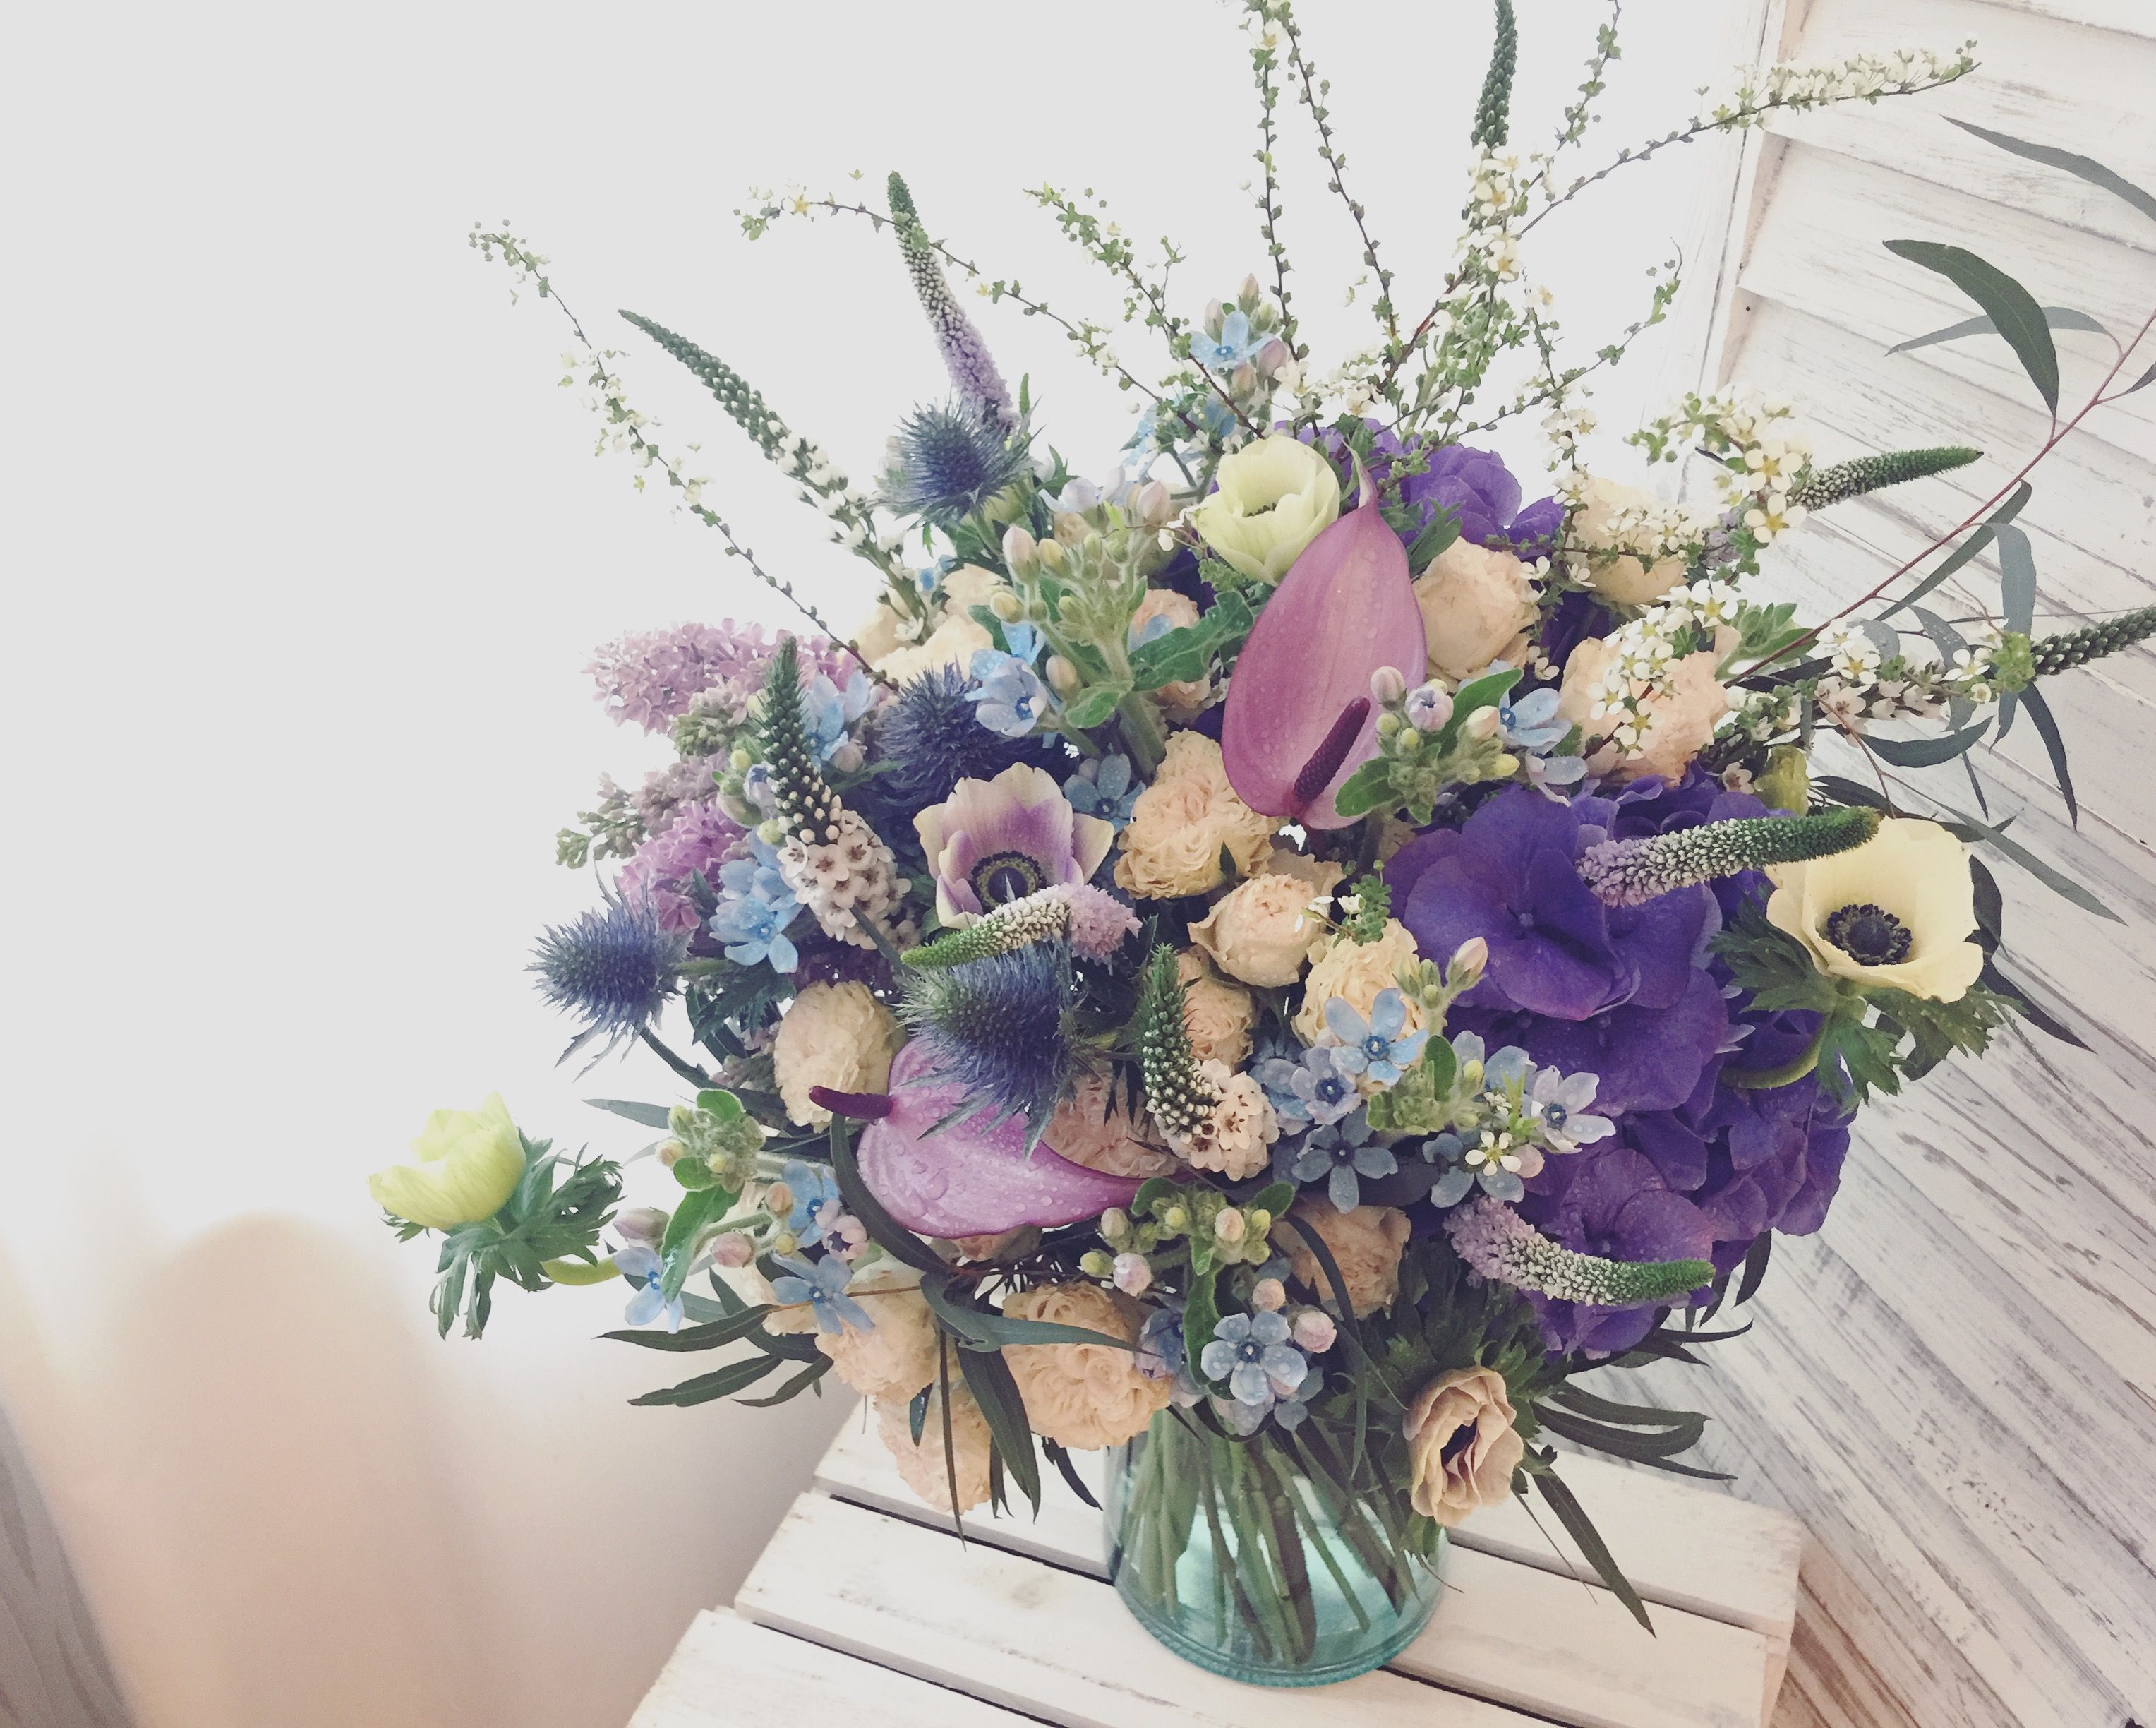 Free photo: Birthday Bouquet - Birthday, Blooming, Bouquet - Free ...